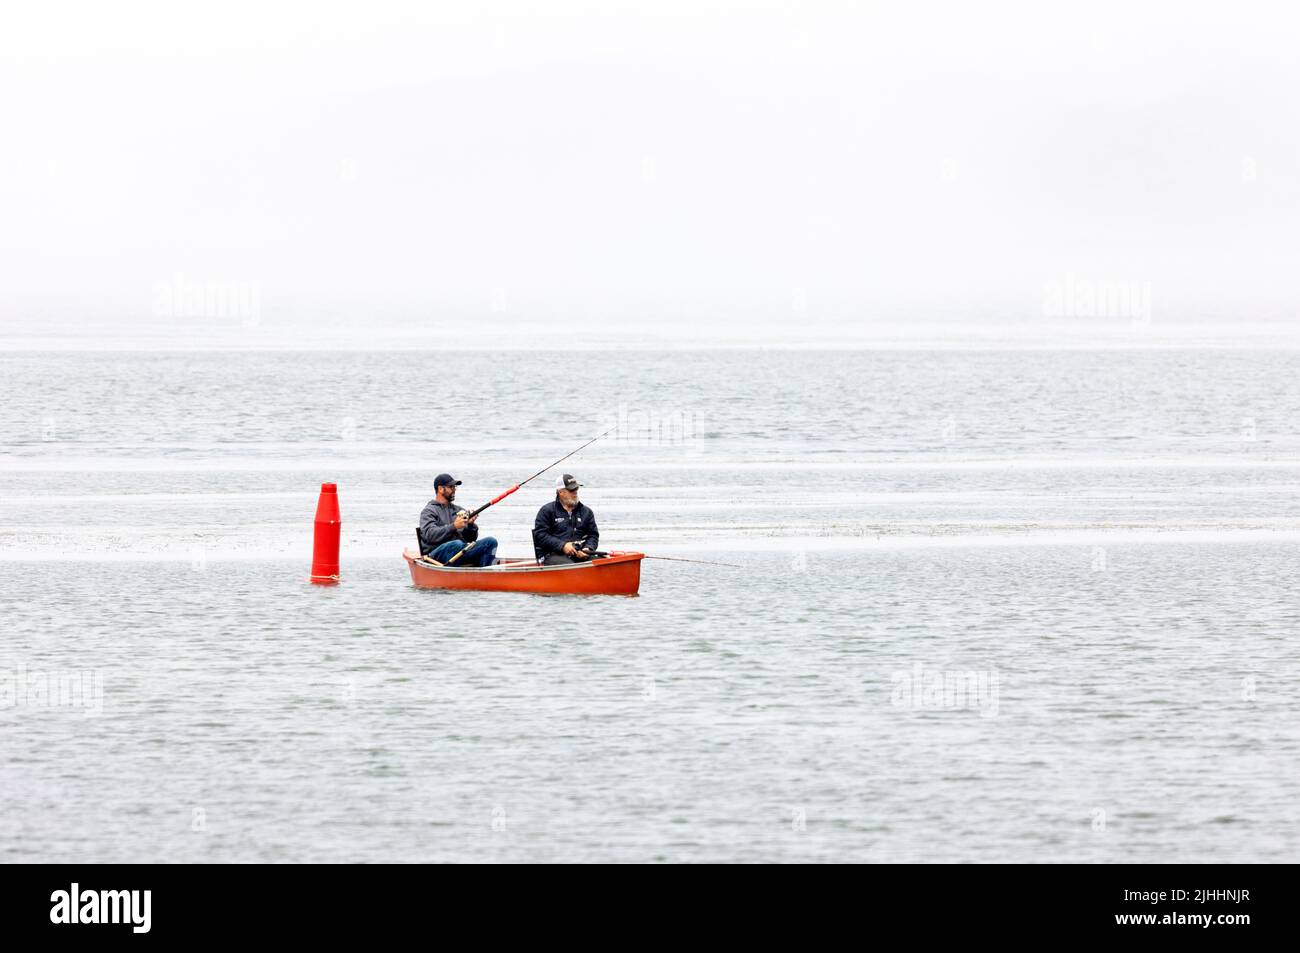 Two Fishermen in small red boat Stock Photo